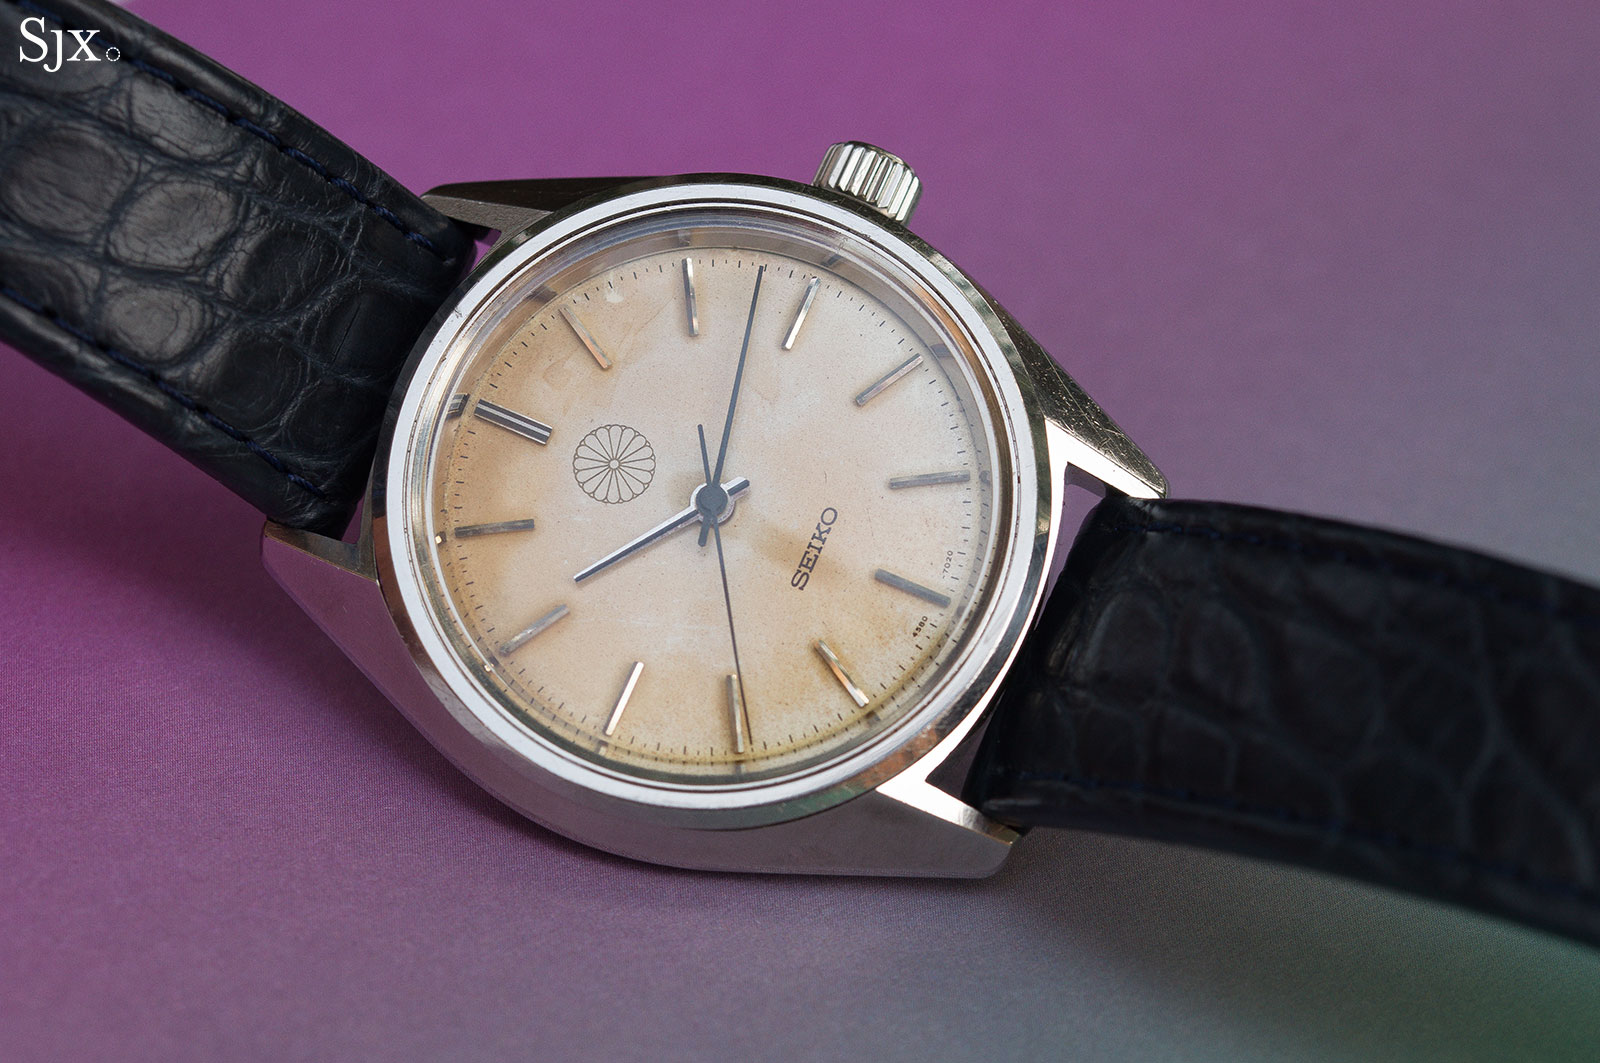 Catching a Unicorn – The Seiko Gifted by the Emperor of Japan | SJX Watches